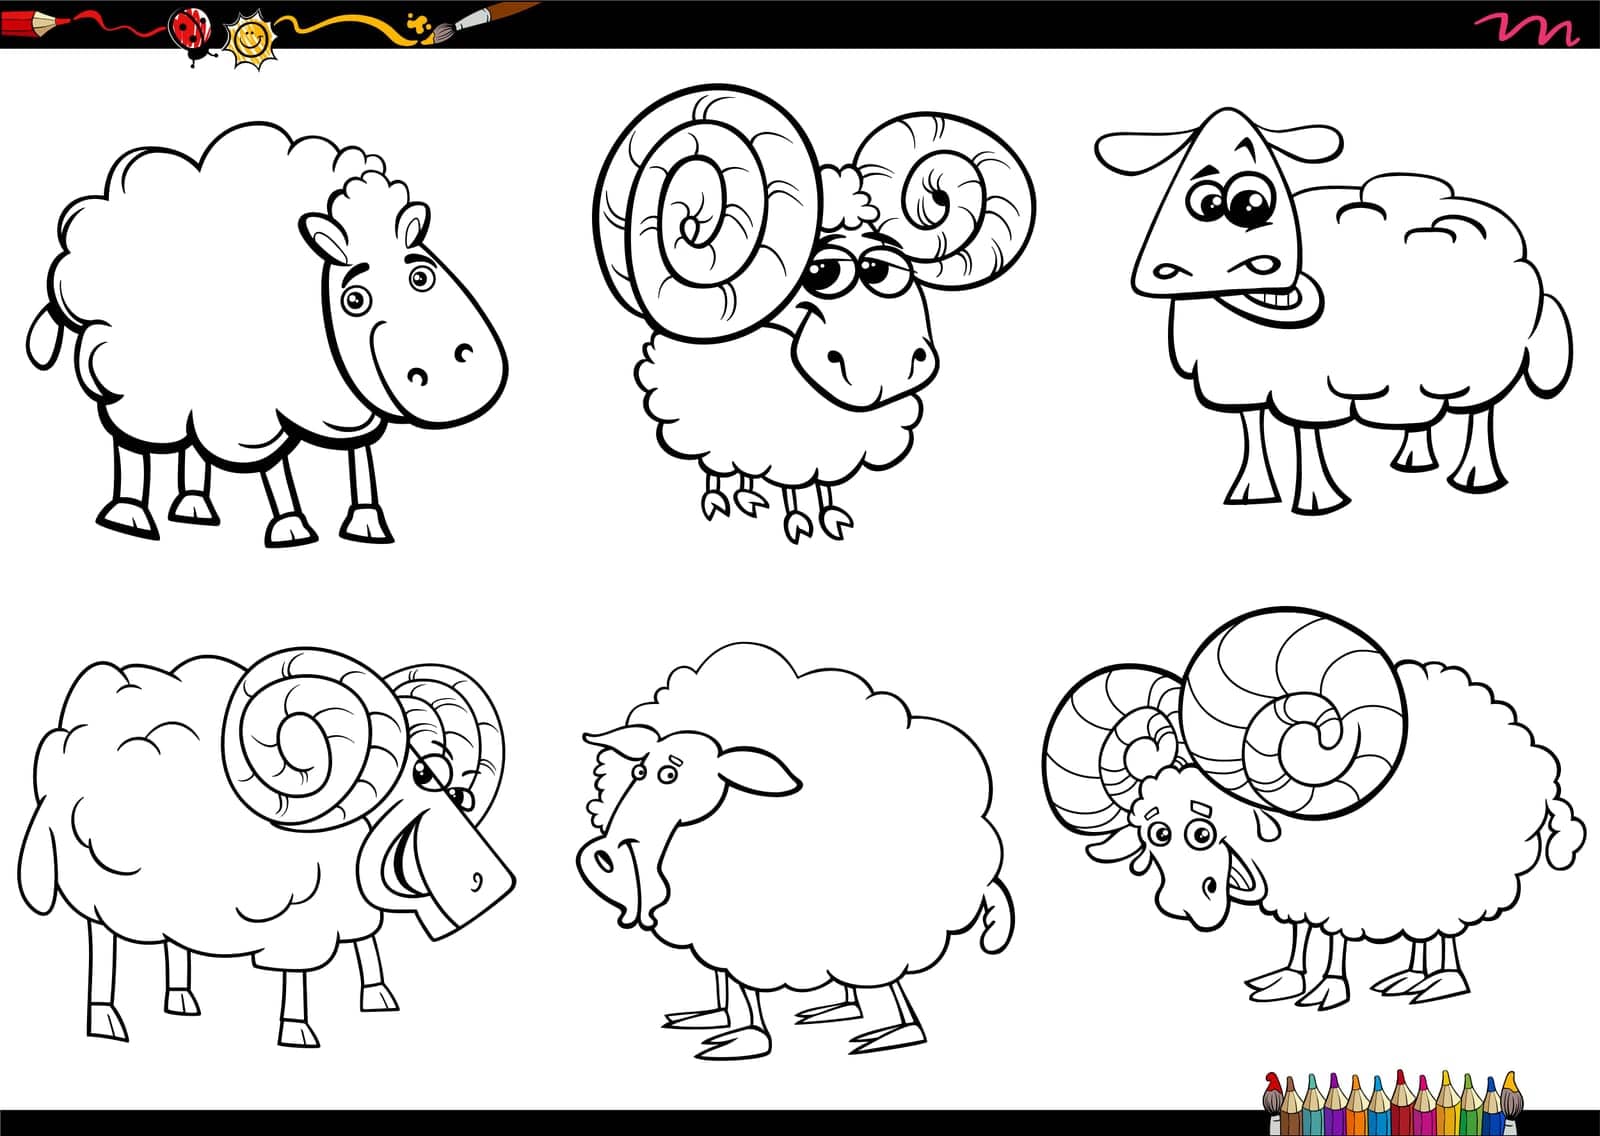 Black and white cartoon illustration of sheep farm animal comic characters set coloring page